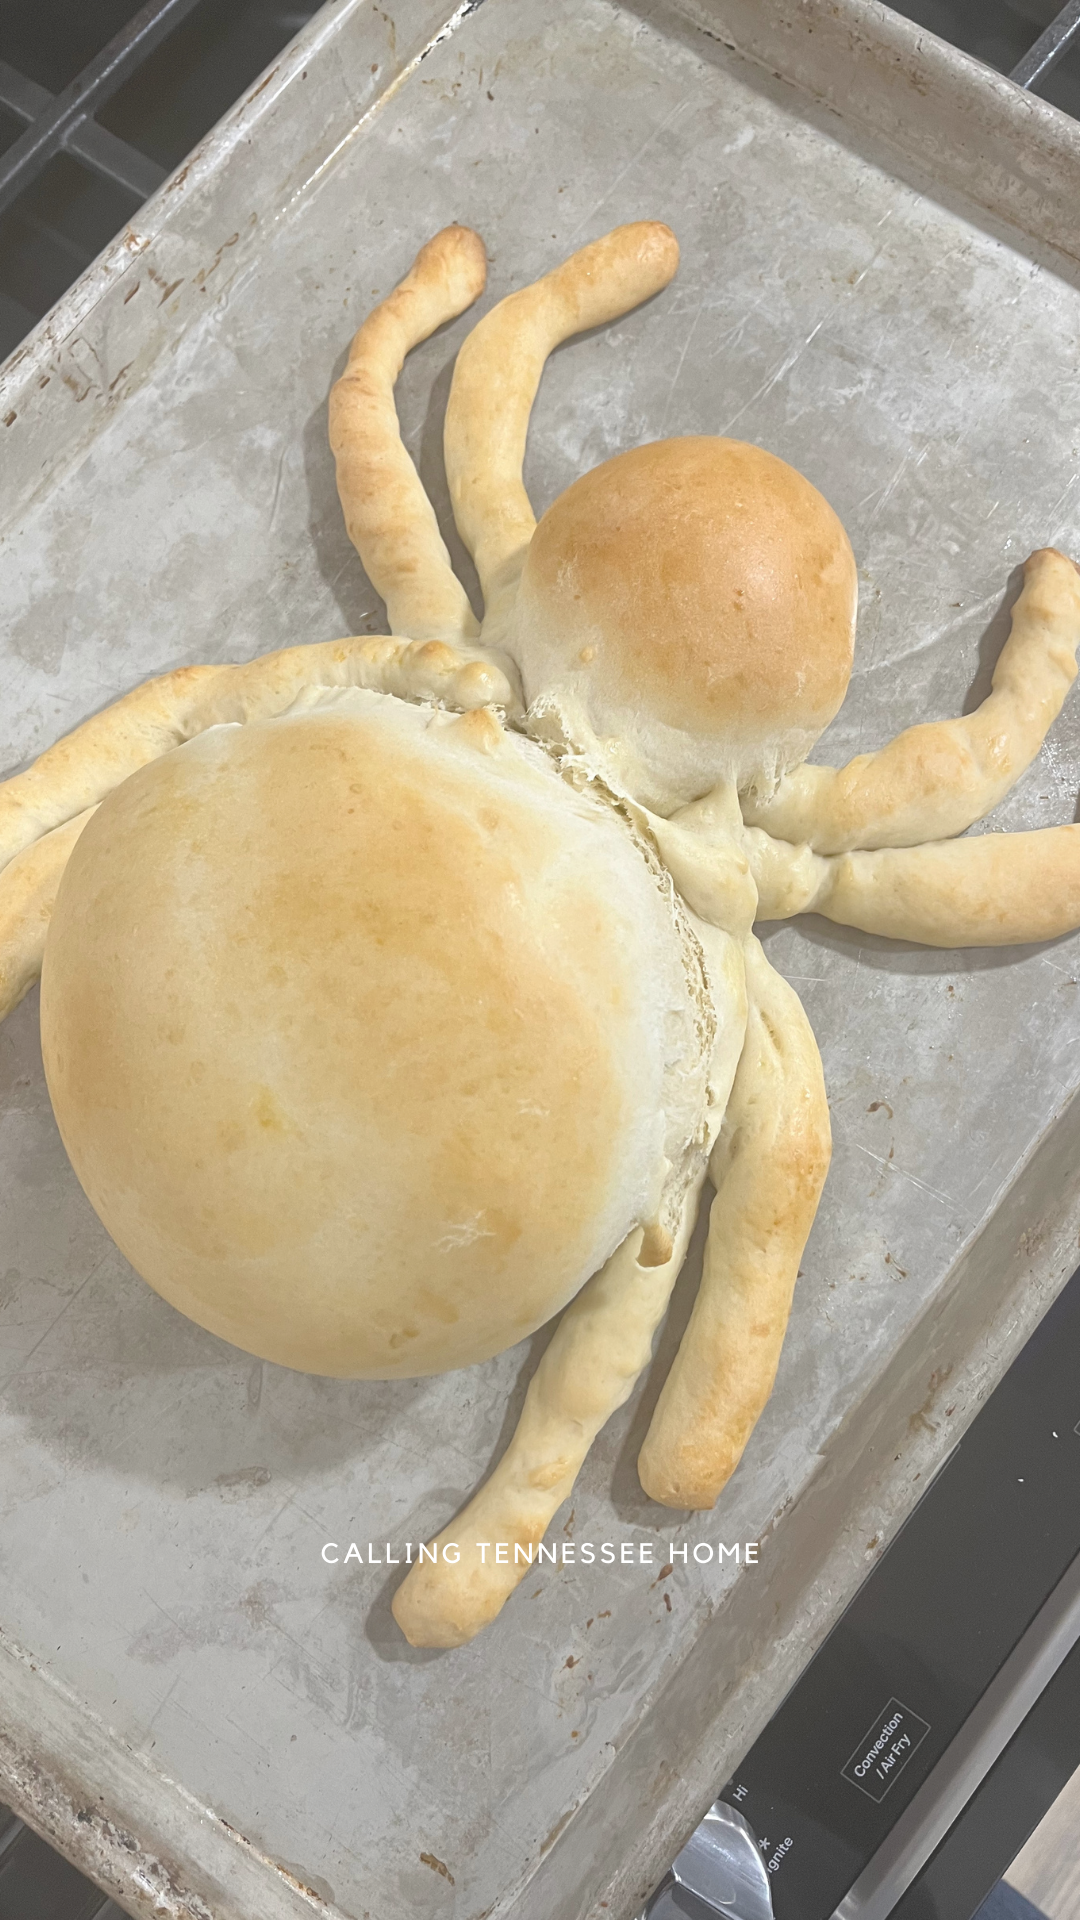 spider bread dip bowl, fun food for halloween, calling tennessee home